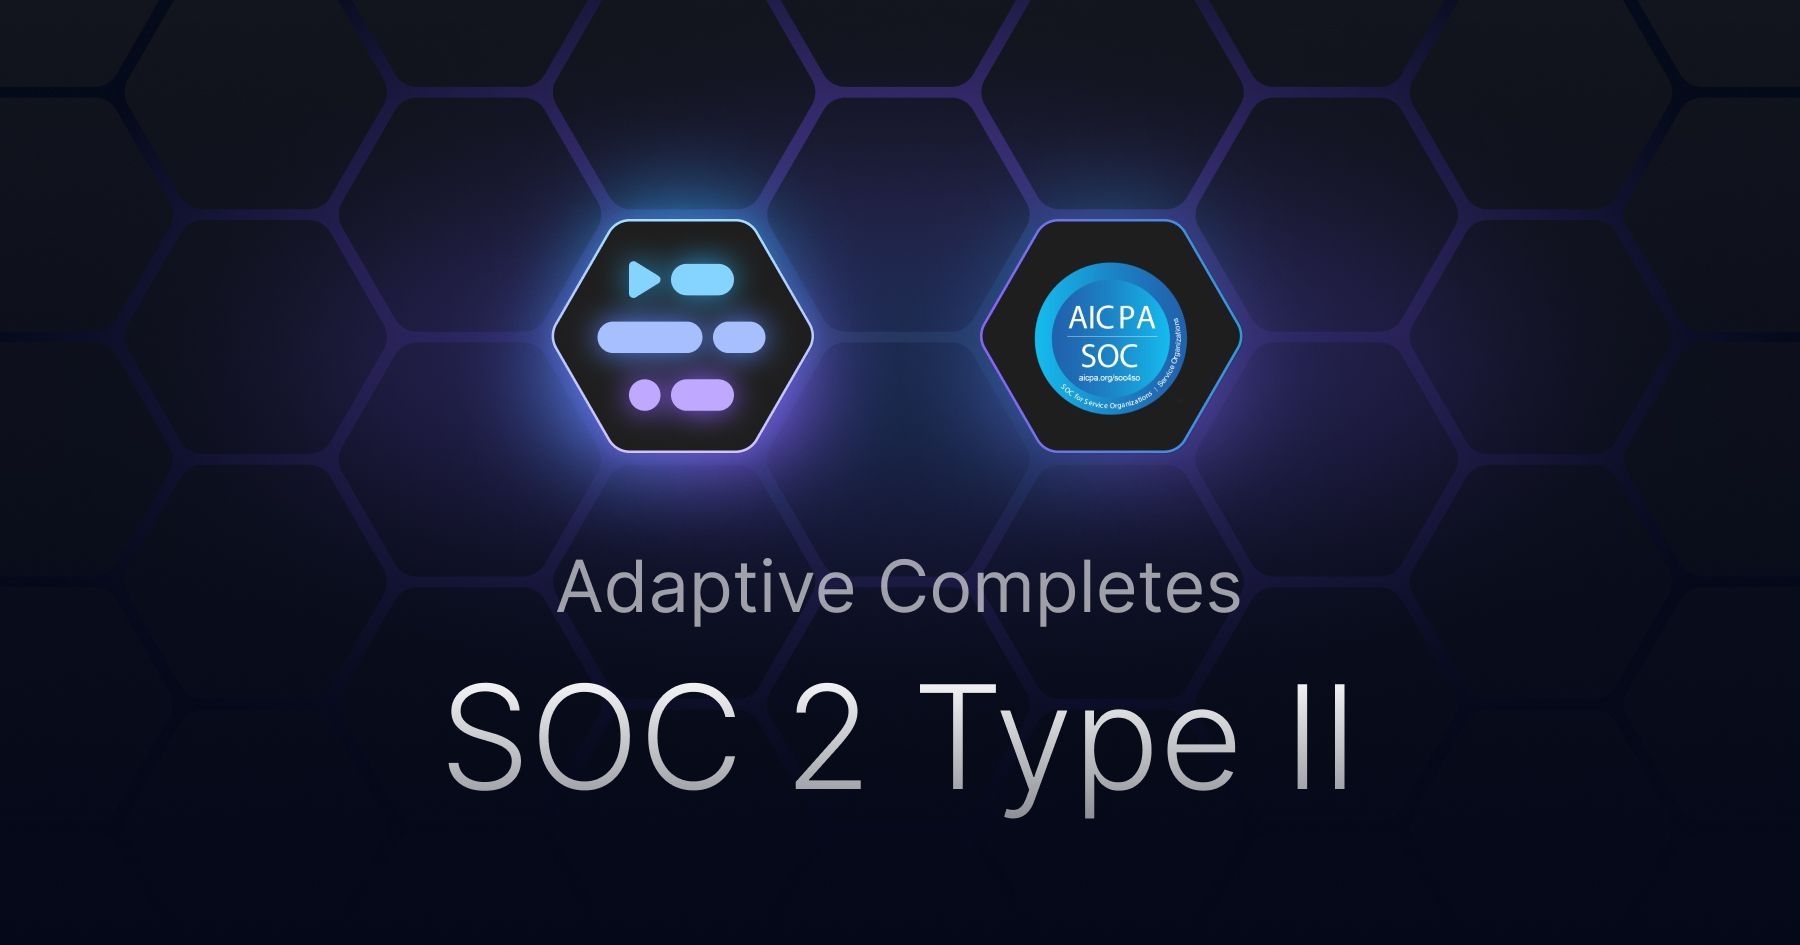 Adaptive has completed SOC2 Type II audit